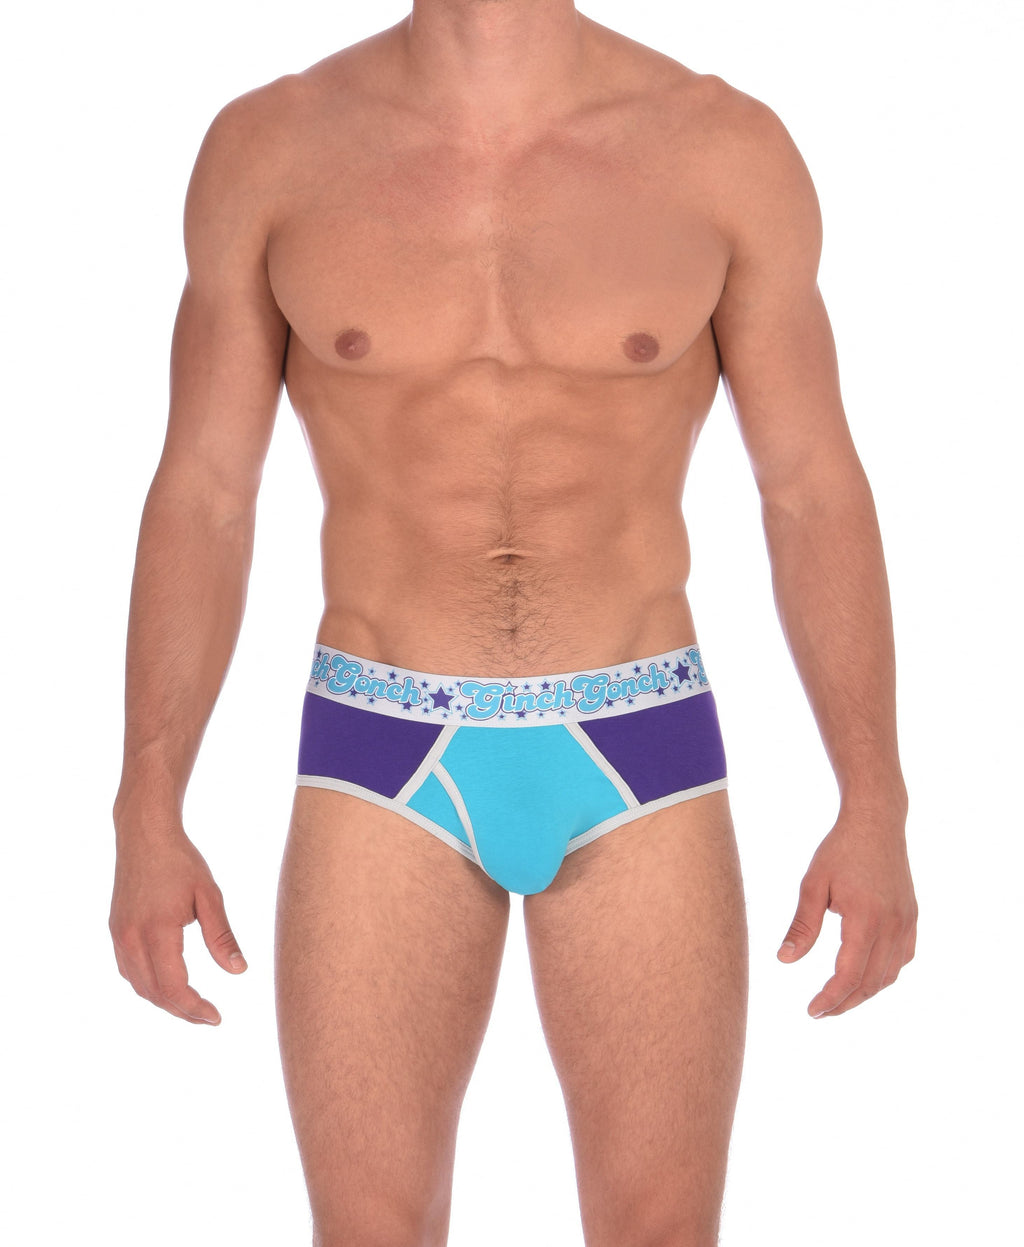 GG Ginch Gonch Purple Haze Low Rise Brief y front - Men's Underwear purple and aqua panels with grey trim and silver printed waistband front 